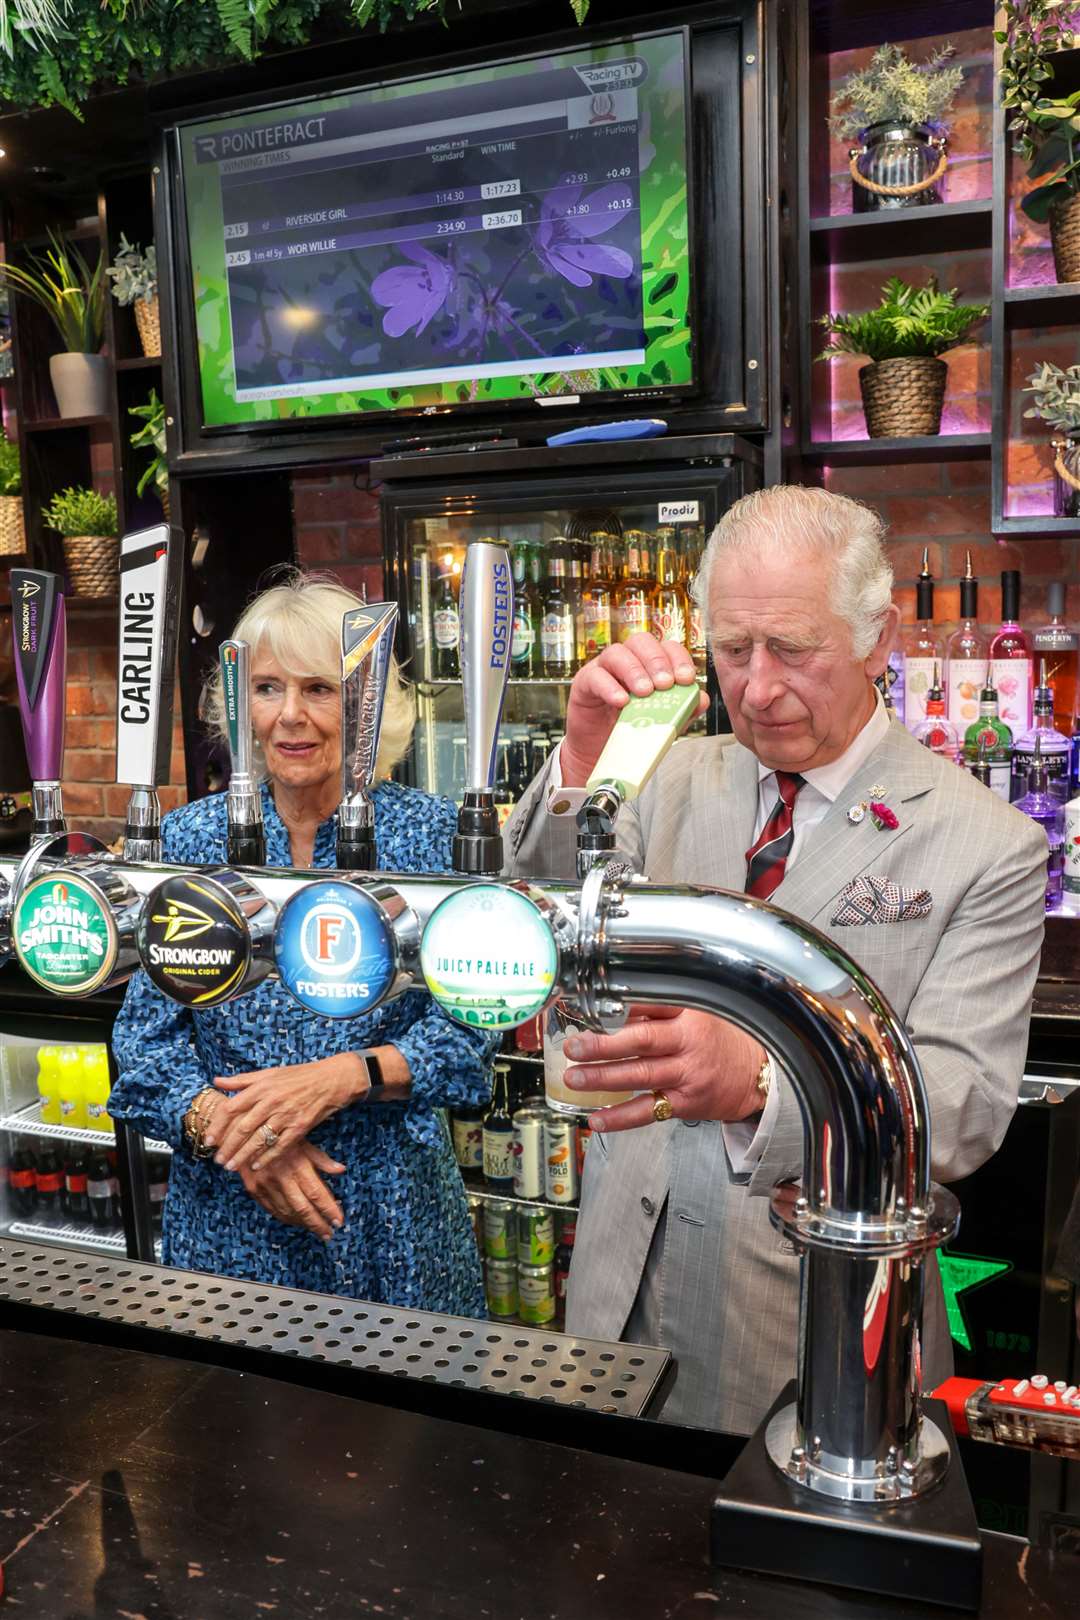 The then-Prince of Wales and the Duchess of Cornwall behind the bar at The Lion pub during a visit to Treorchy in July (Chris Jackson/PA)